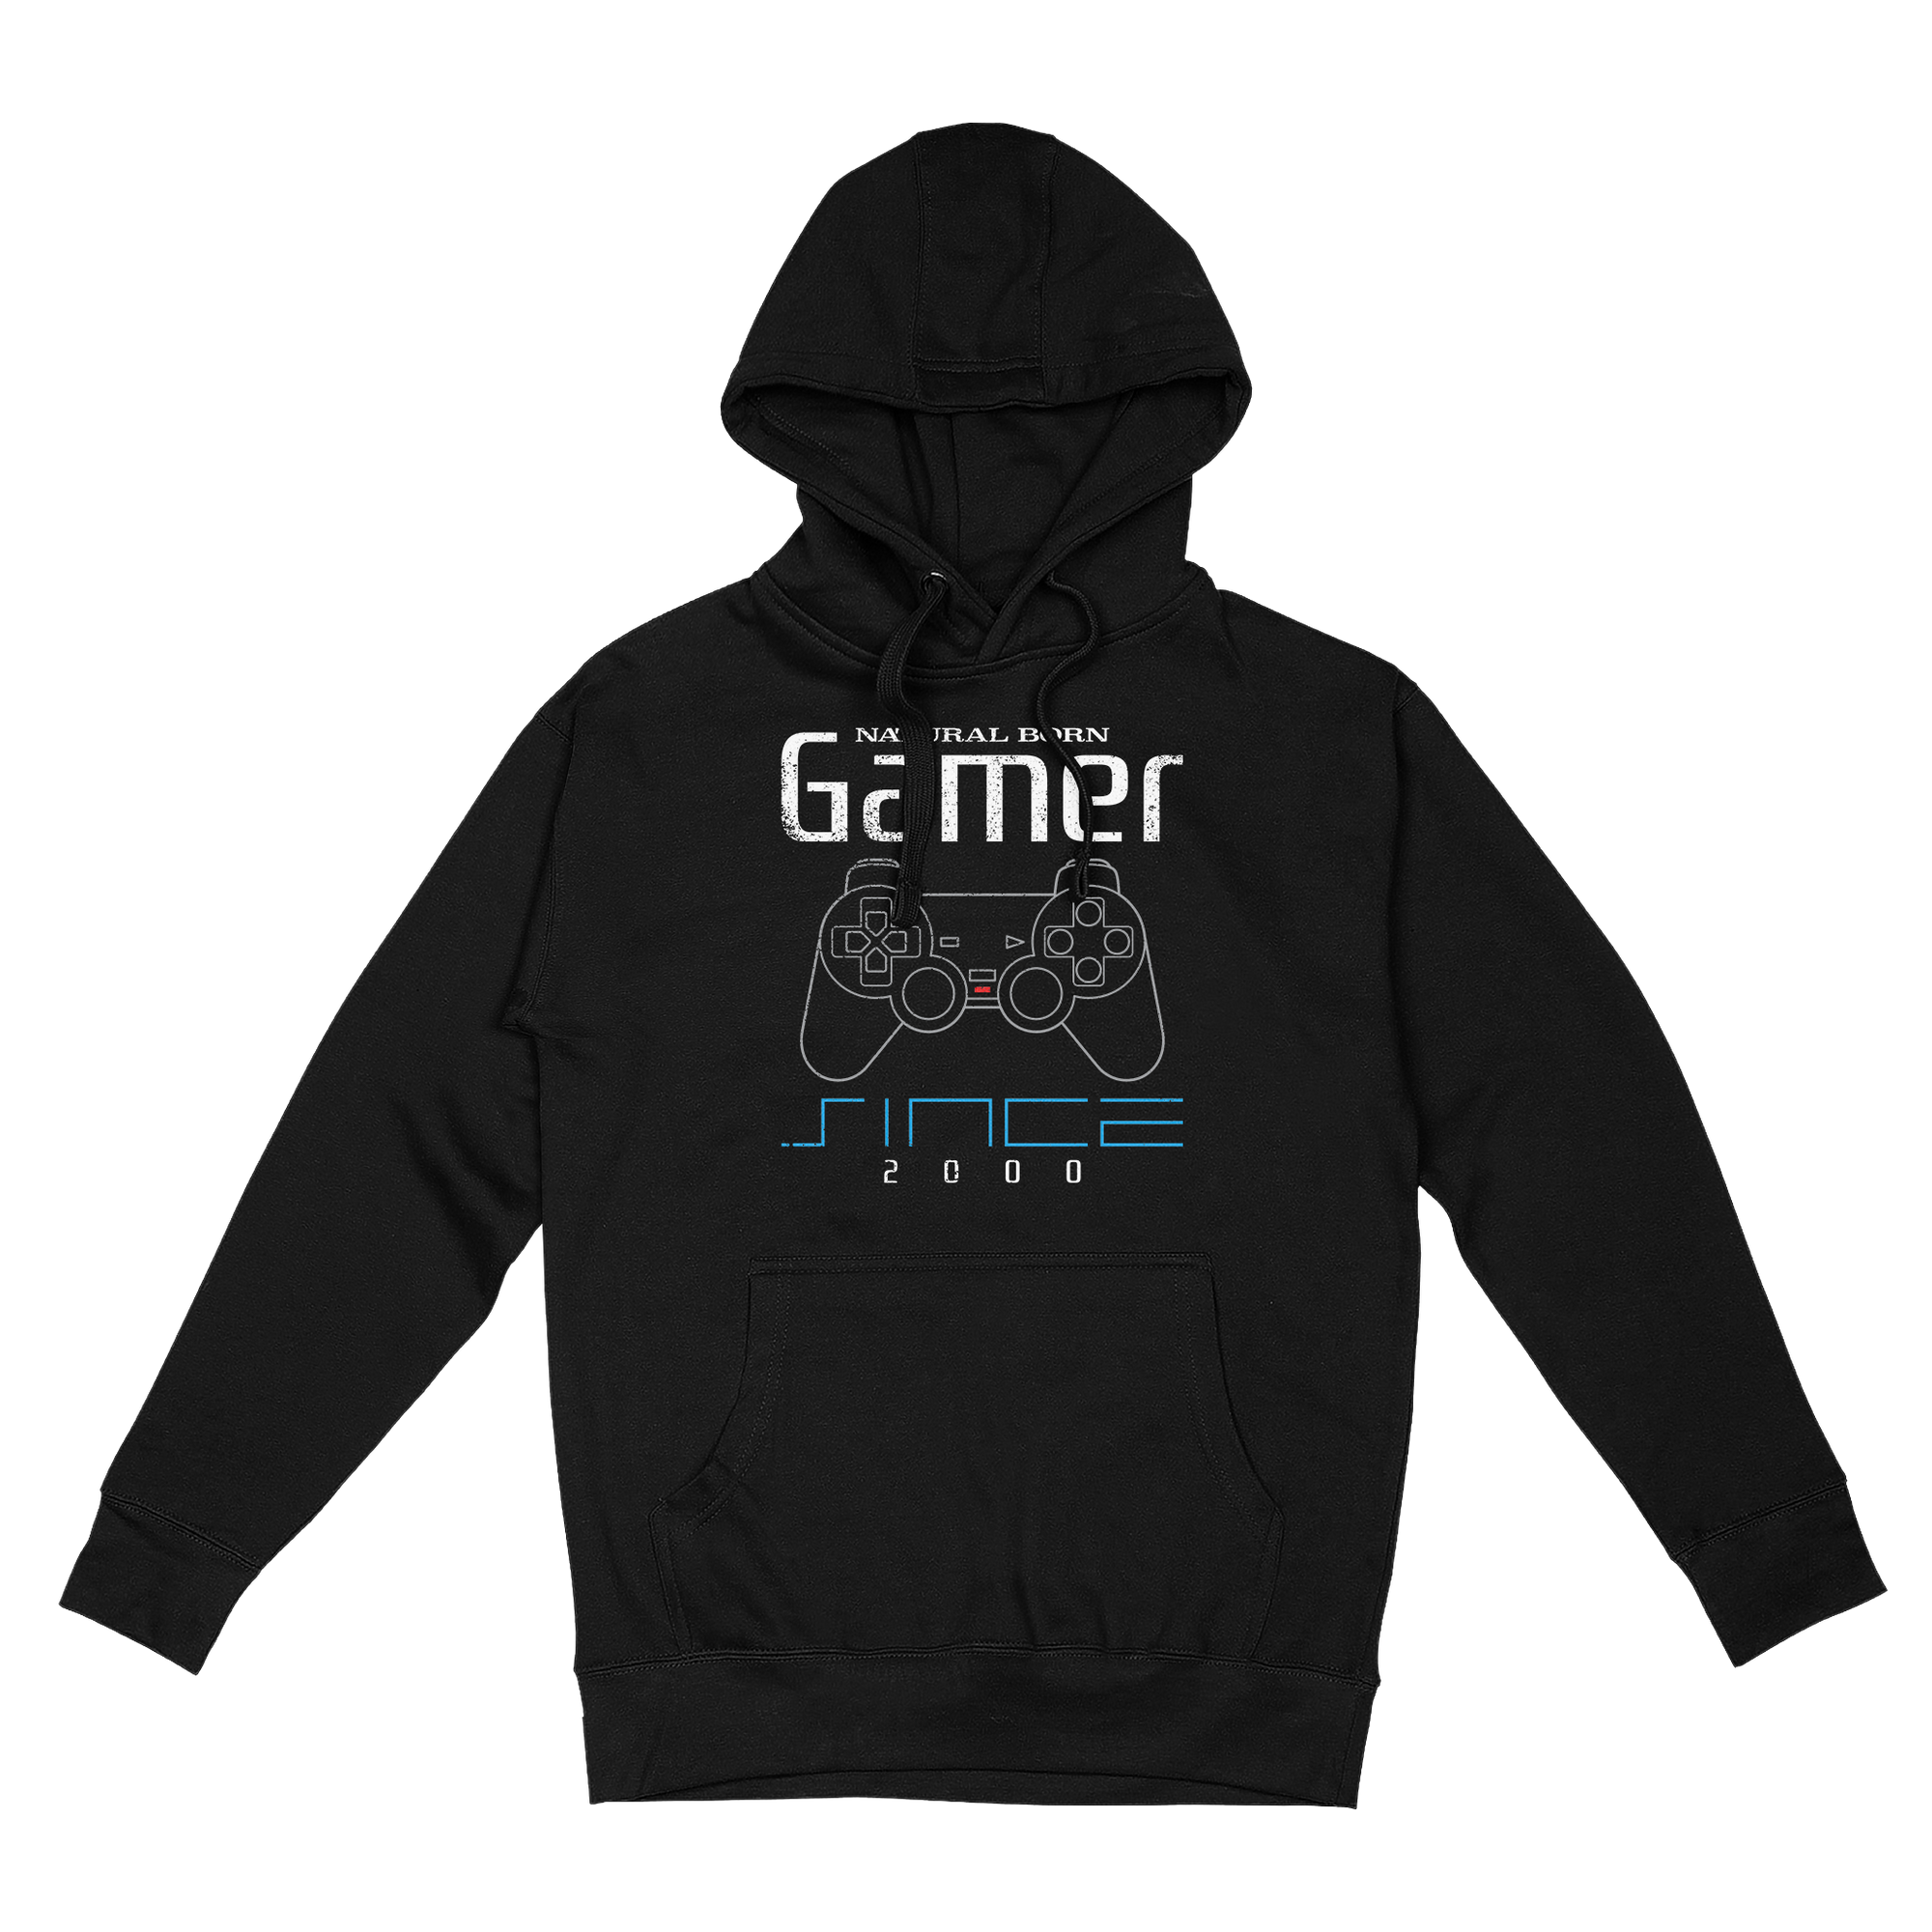 Natural Born Gamer Since 2000 Hoodie